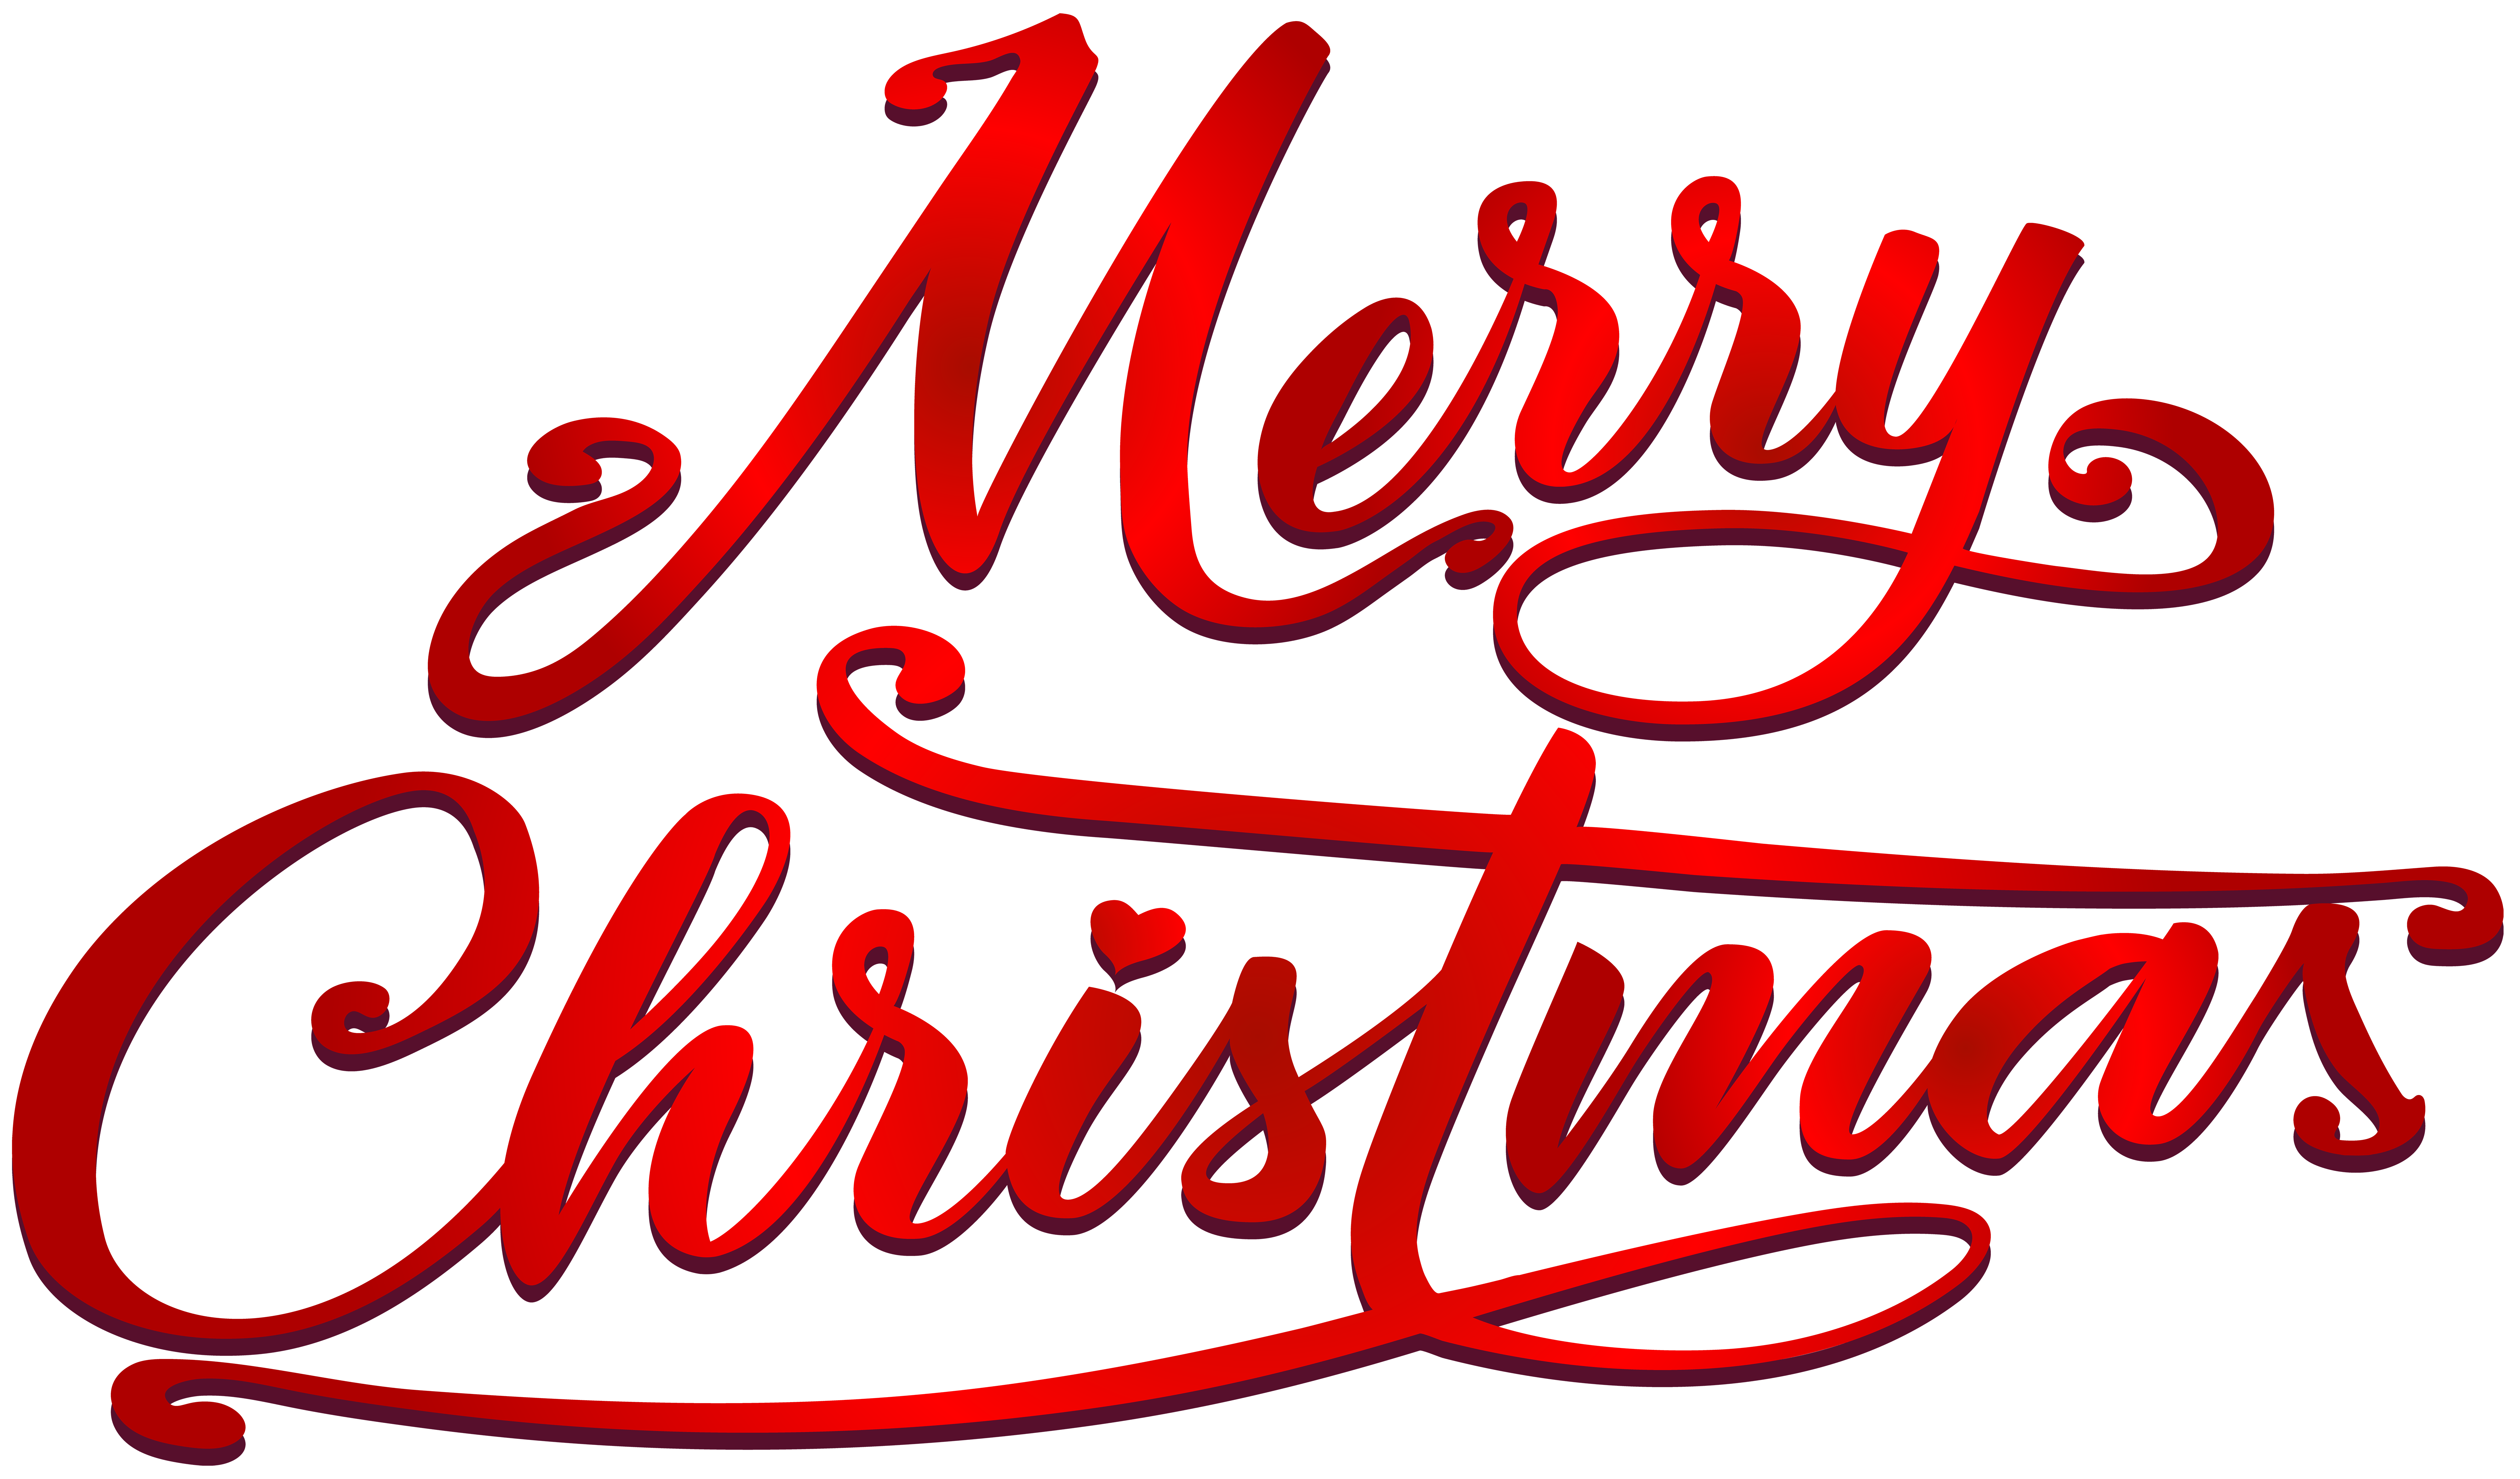 Calligraphy Merry Christmas Text Images Png